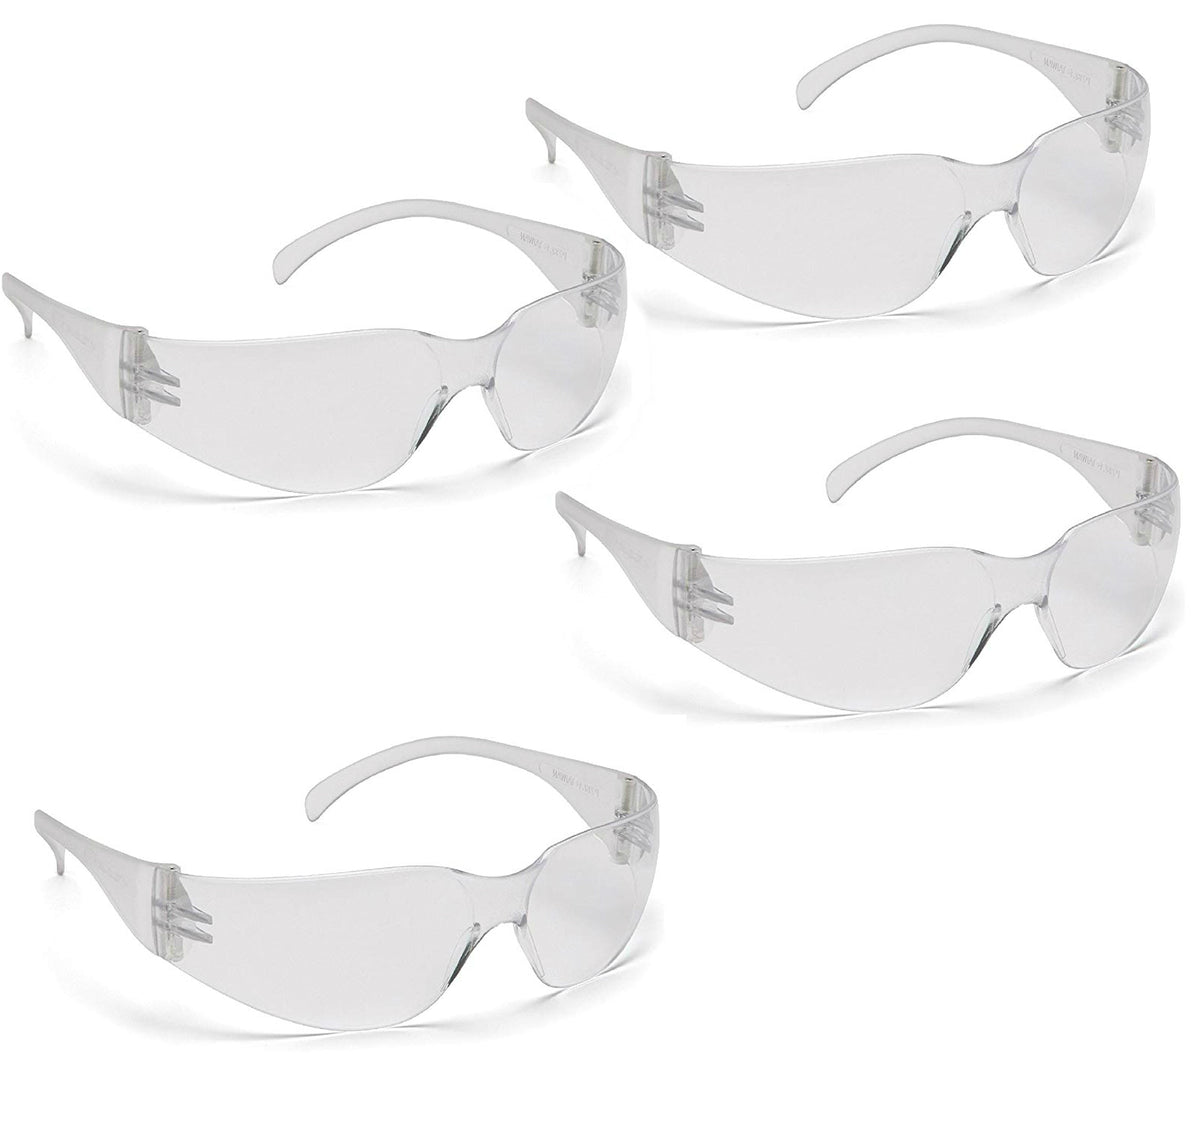 Pyramex S4110S4PK-TV General Purpose Frameless Safety Glasses, Clear, 4-Pack